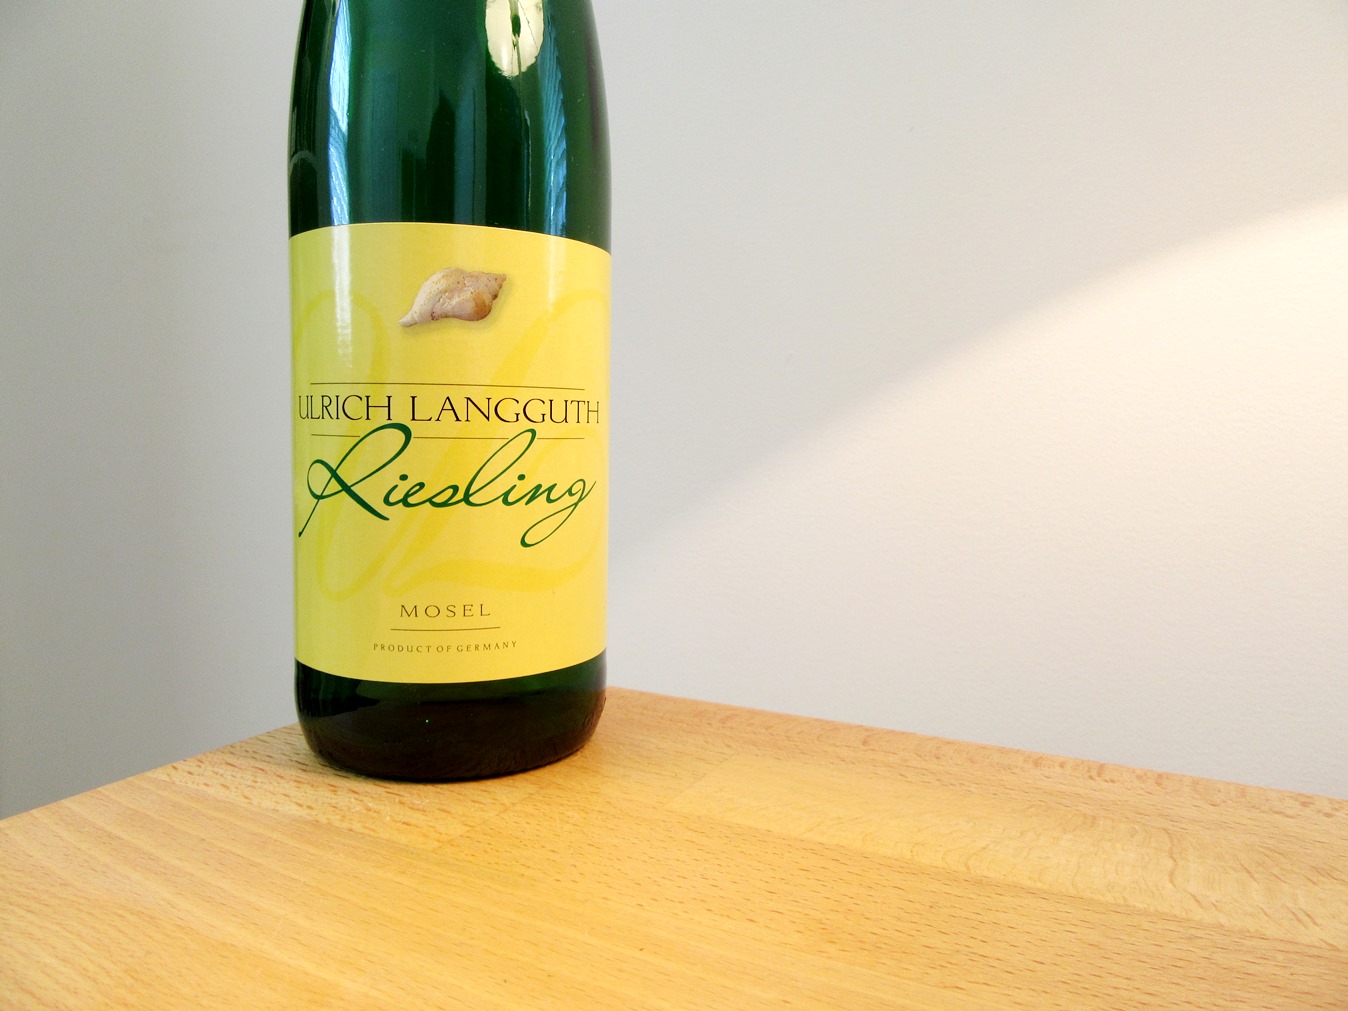 Ulrich Langguth, Riesling 2015, Mosel, Germany, Wine Casual